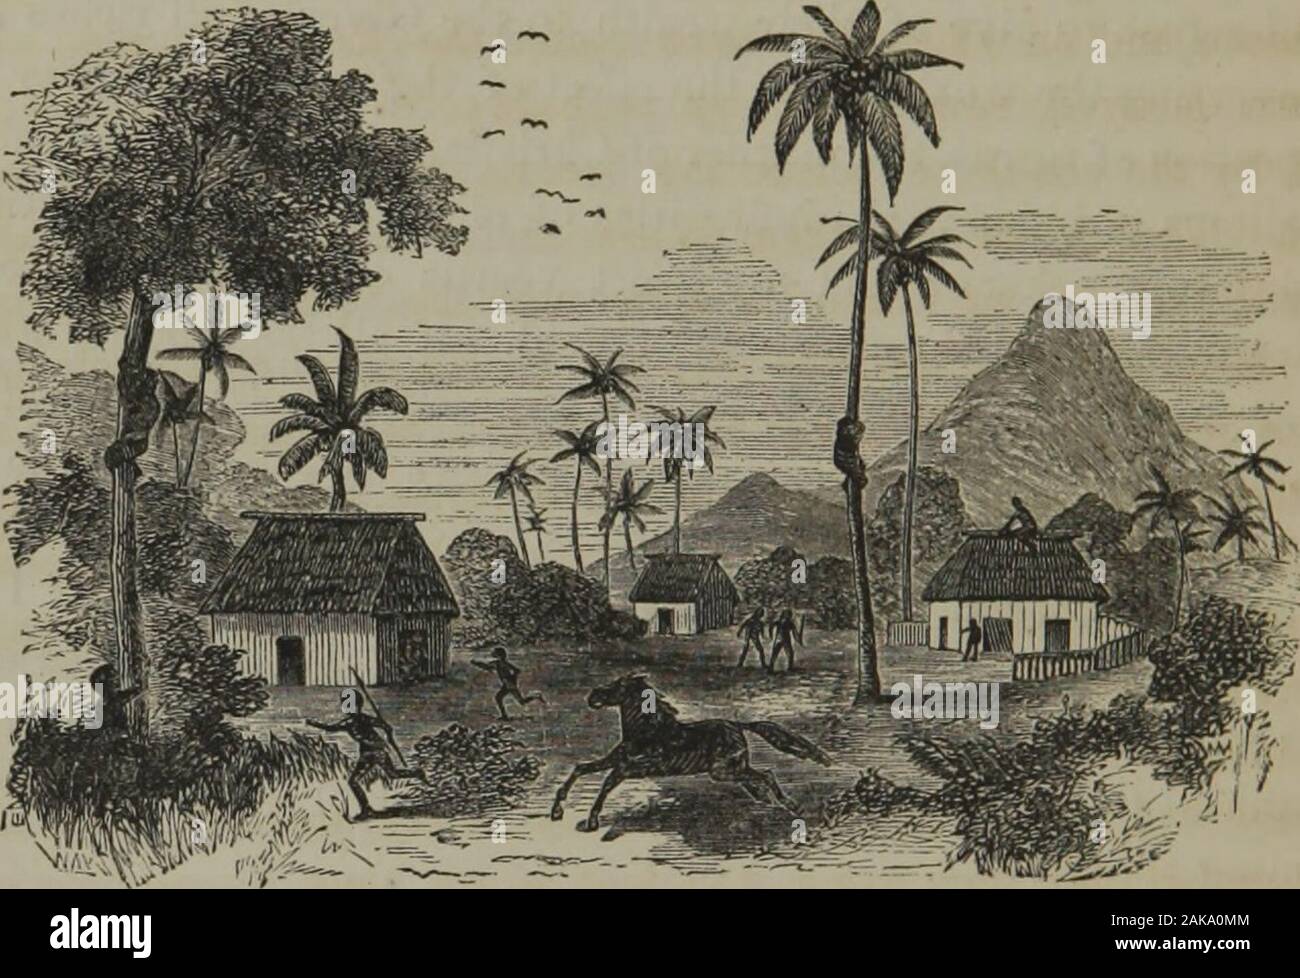 Fiji and the Fijians . onflagration of towns, the murder of Christians, the violation of chastity,the wailings of infancy, the infirmities of old age not only unpitied, butturned into mockery; and my heart yearns over those whose suffer-ings are unremoved through love of gold. If all the stirring scenes ofCalvary, and the unchangeable love of a merciful God, will not stir suchup to duty, could you not alarm their fears by exhibiting the fearfulconsequences of retaining more than is meet, when Christs cause withsuffering humanity requires it ] But you will be thinking, if I do notoease this str Stock Photo